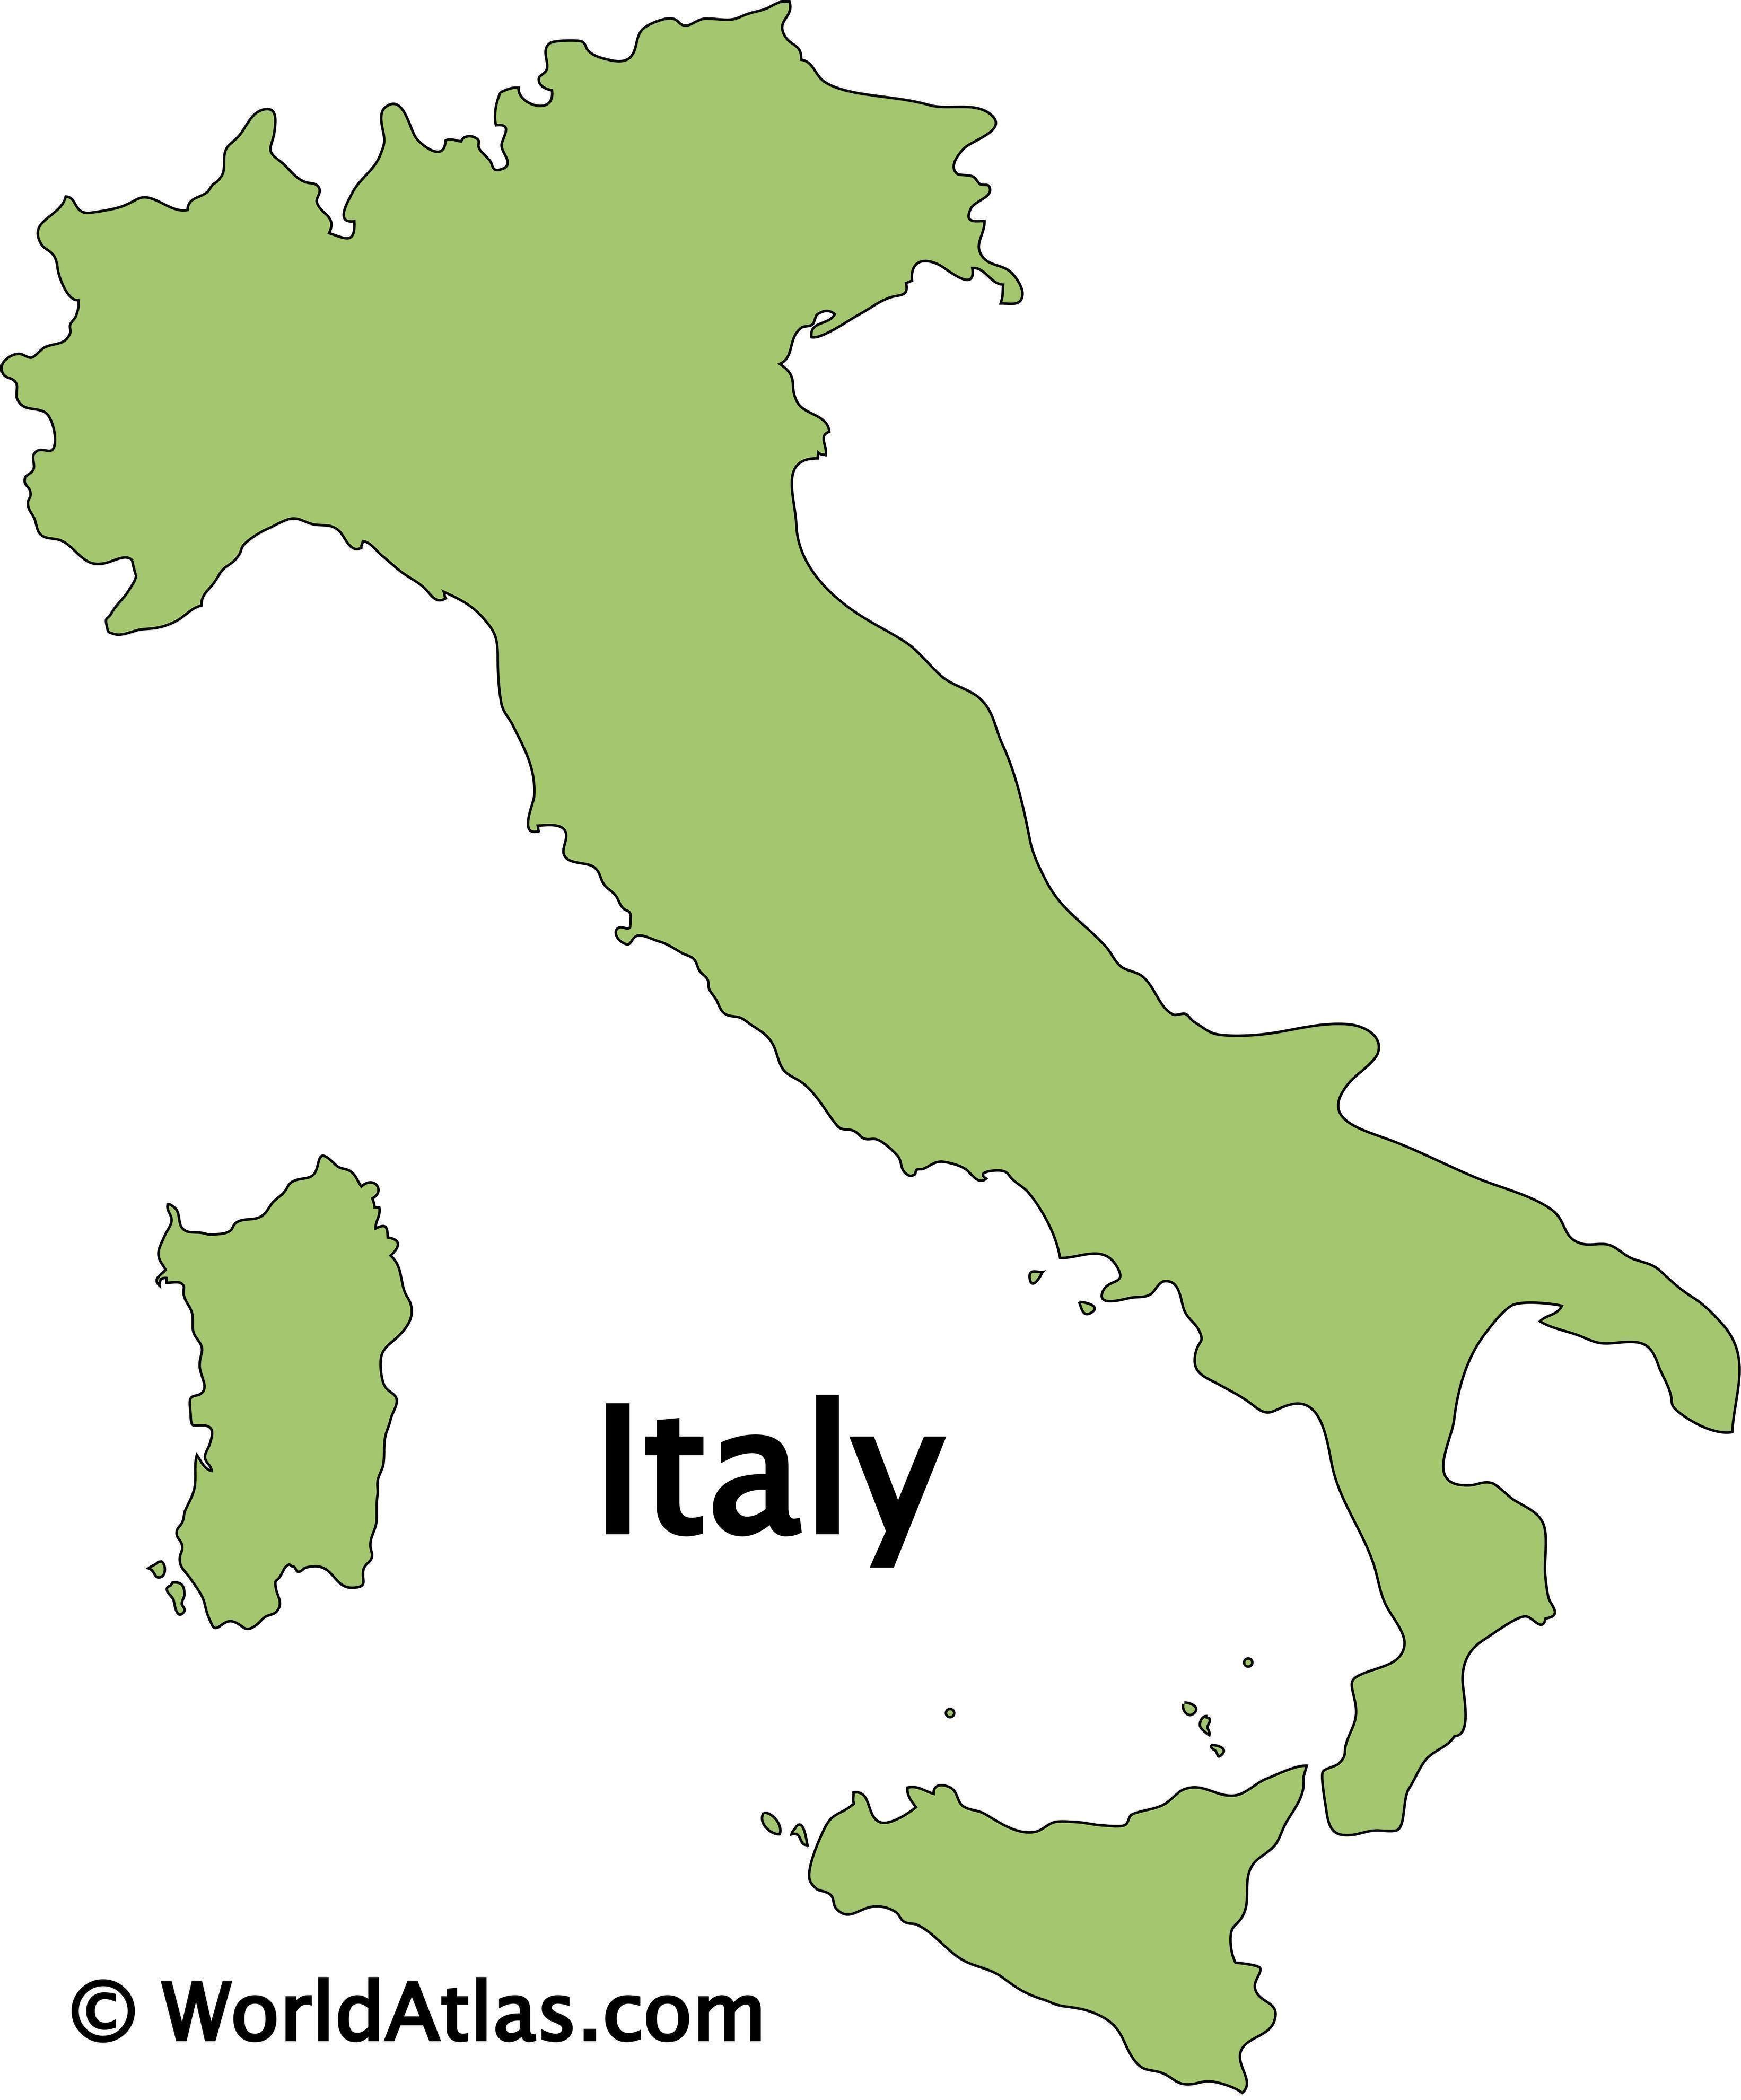 Italy  Facts, Geography, History, Flag, Maps, & Population